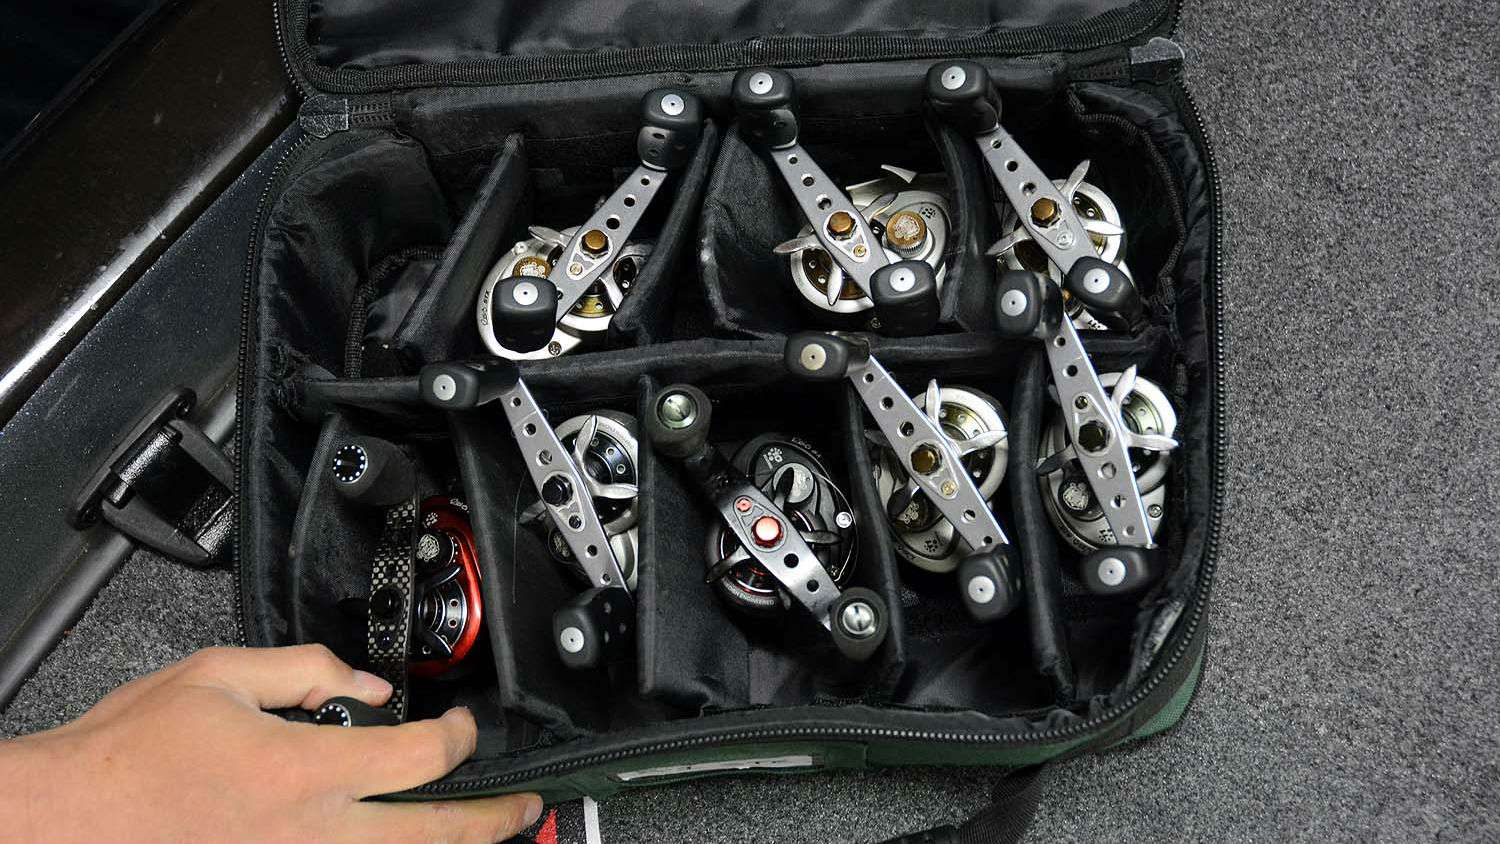 Lucas stores his Abu Garcia reels inside the partitioned compartments. The reels stay organized, clean and ready for easy identification. He likes this bag style because the cover completely opens for better viewing and access. 